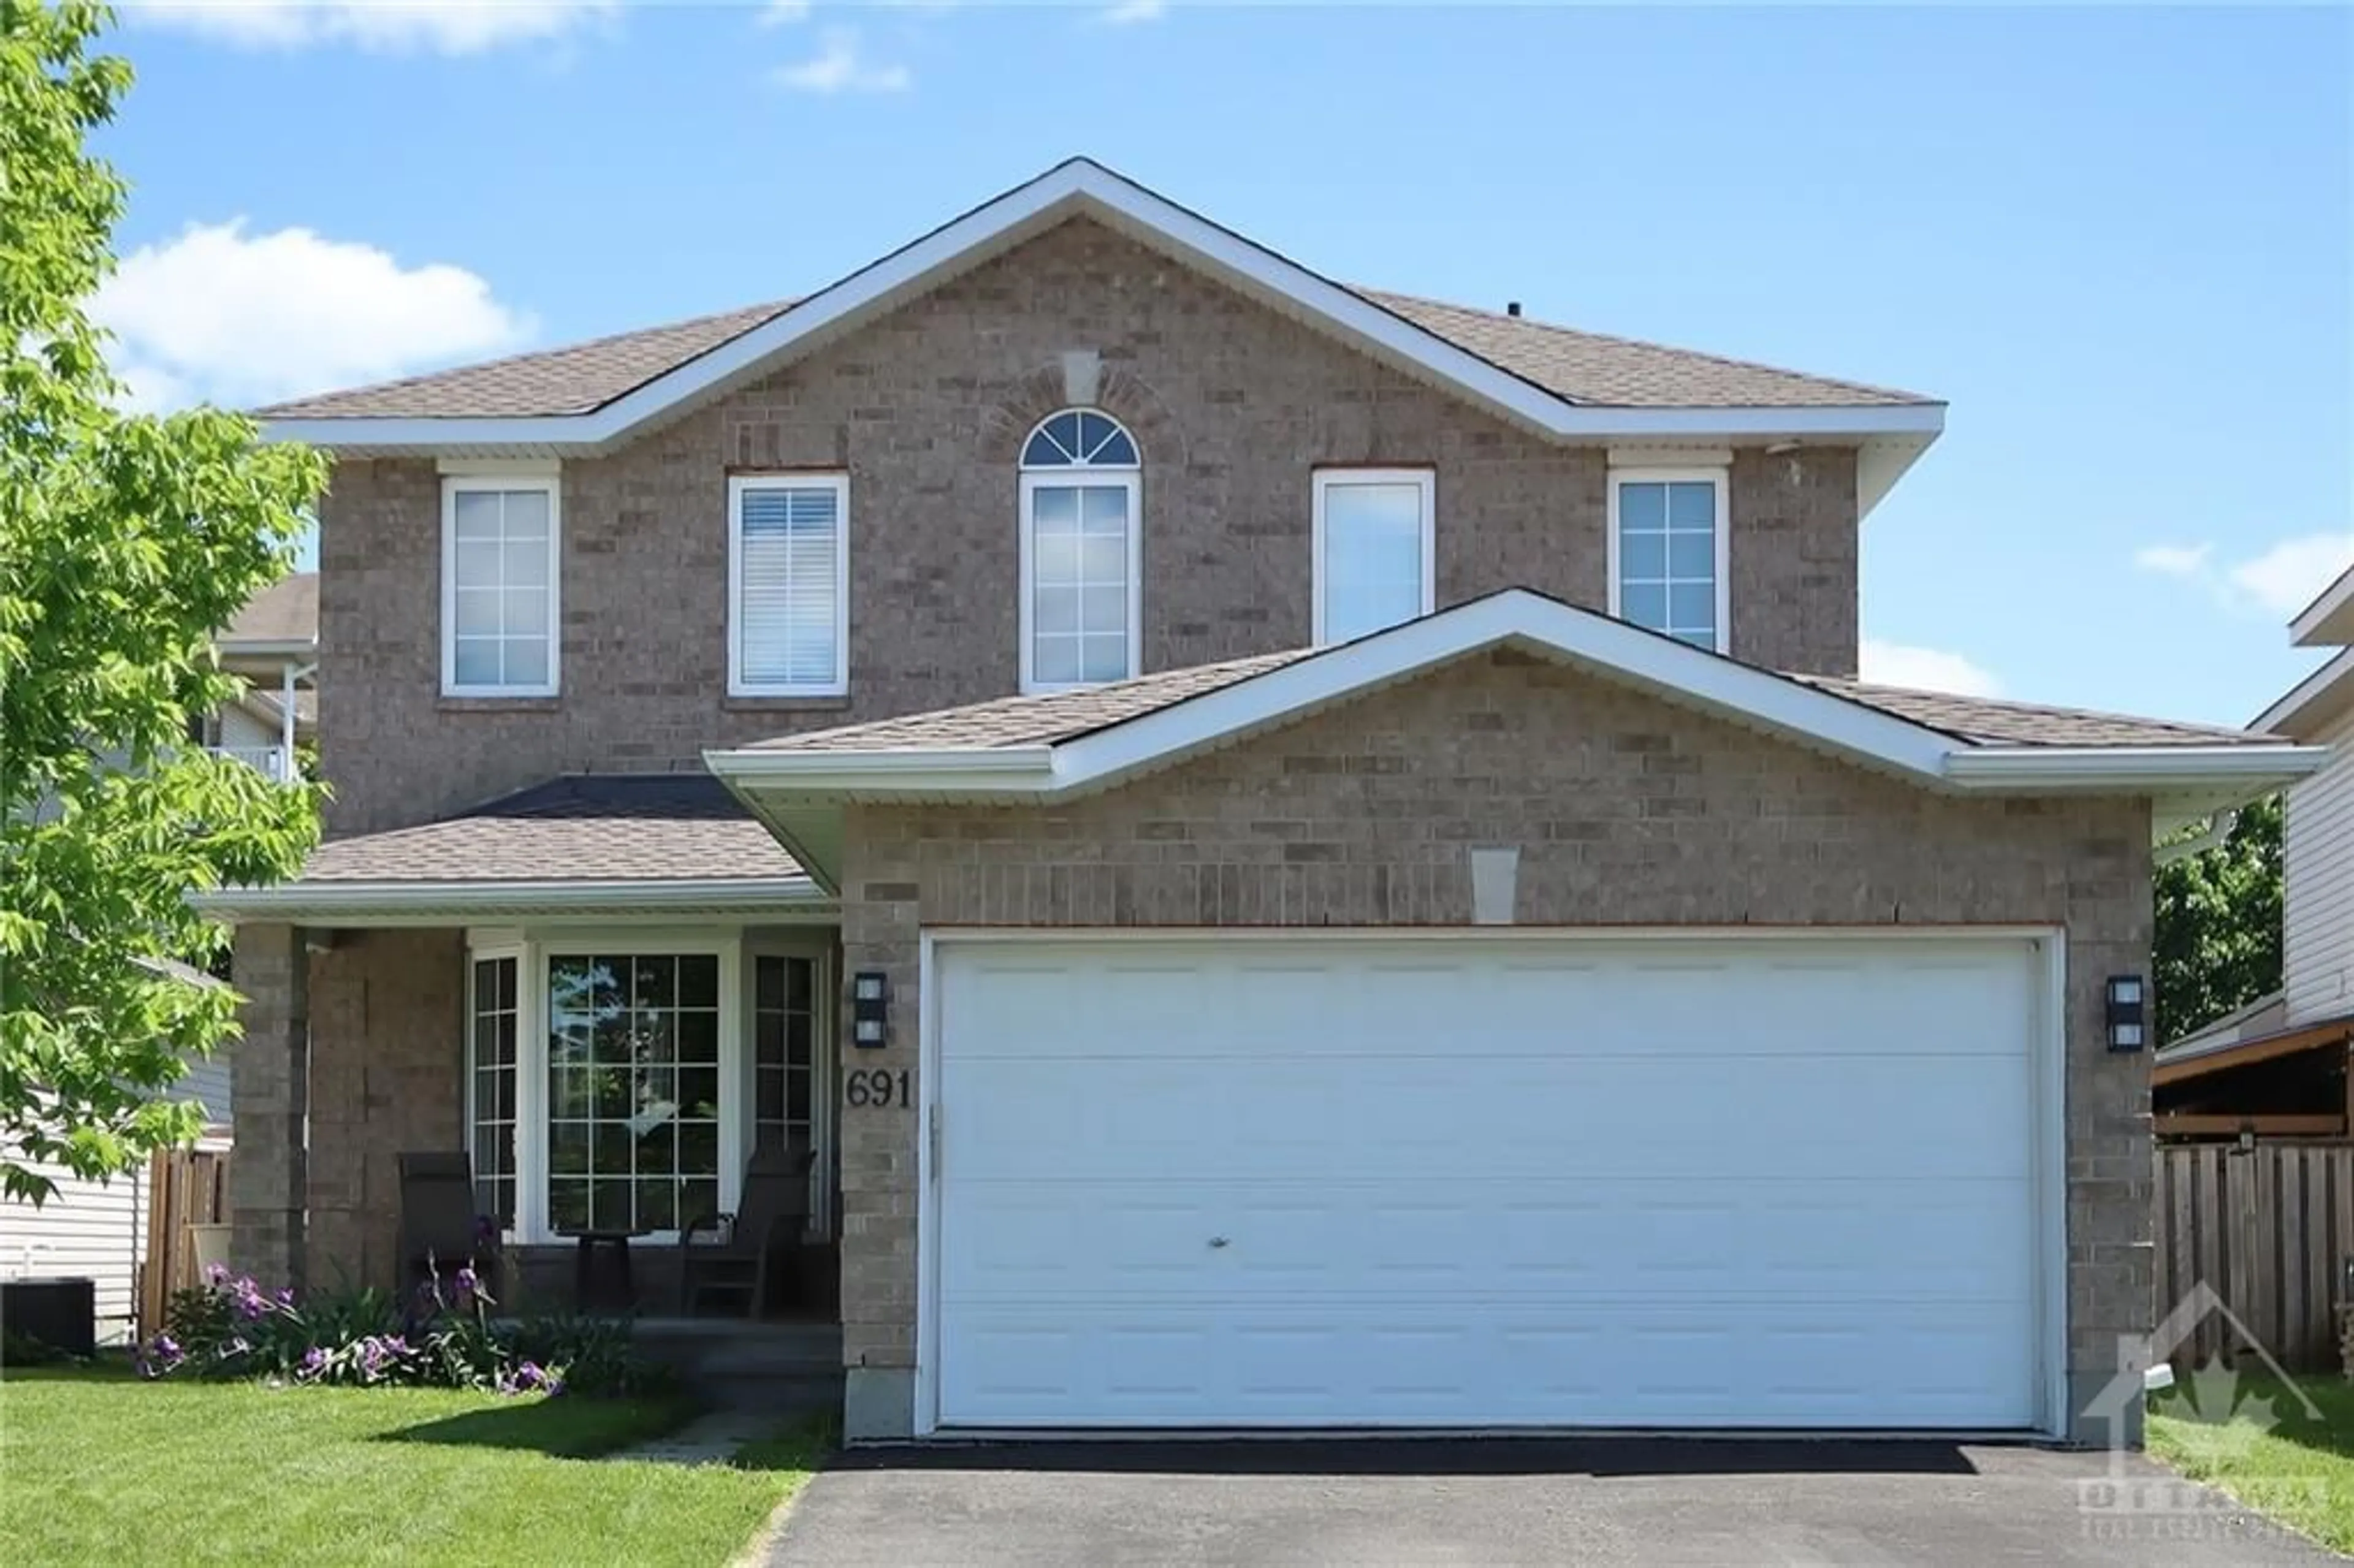 Home with brick exterior material for 691 VERMILLION Dr, Ottawa Ontario K1V 1W2